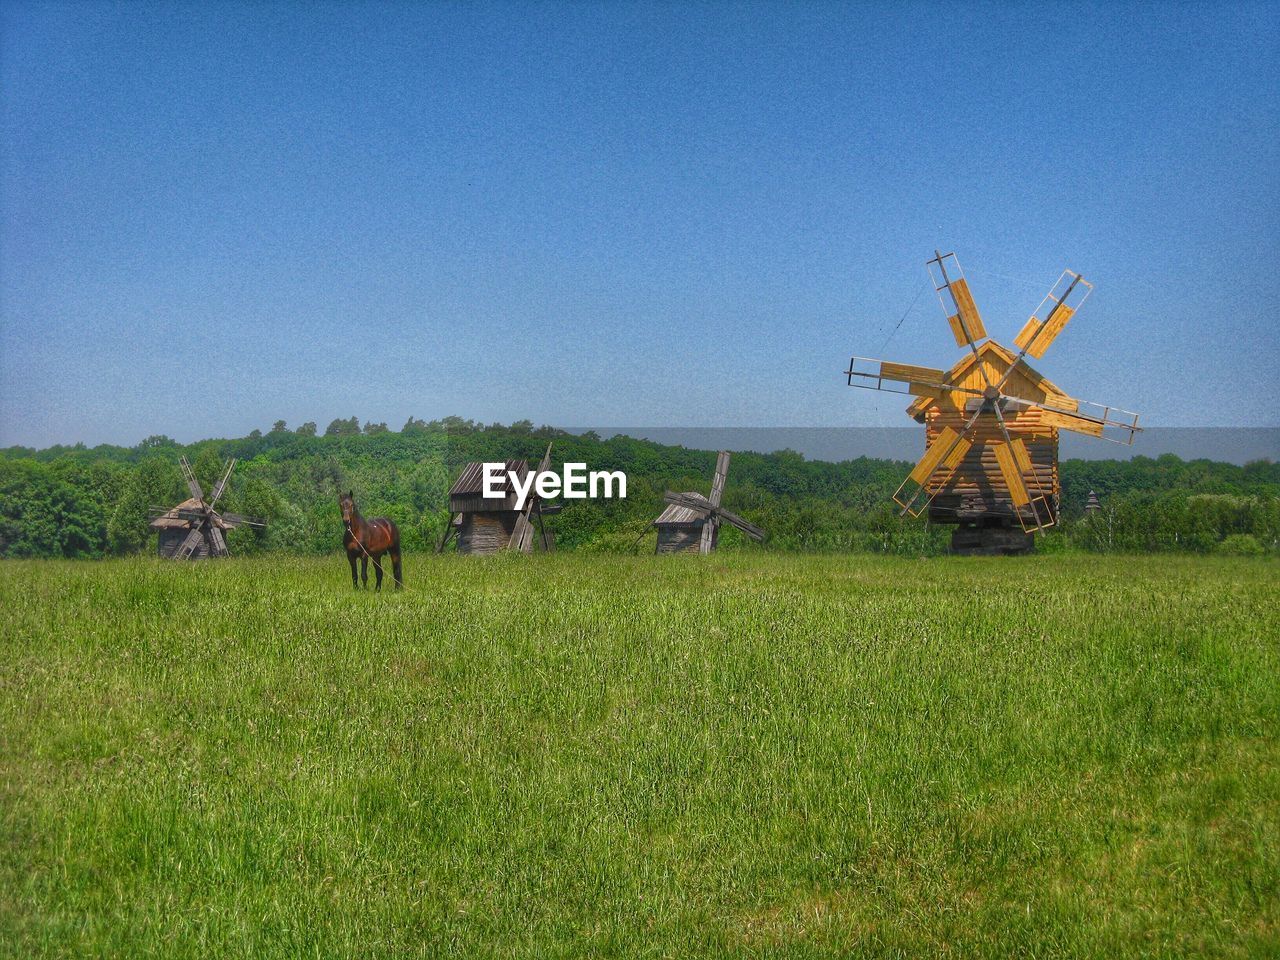 Horses by traditional windmills on grassy field against sky